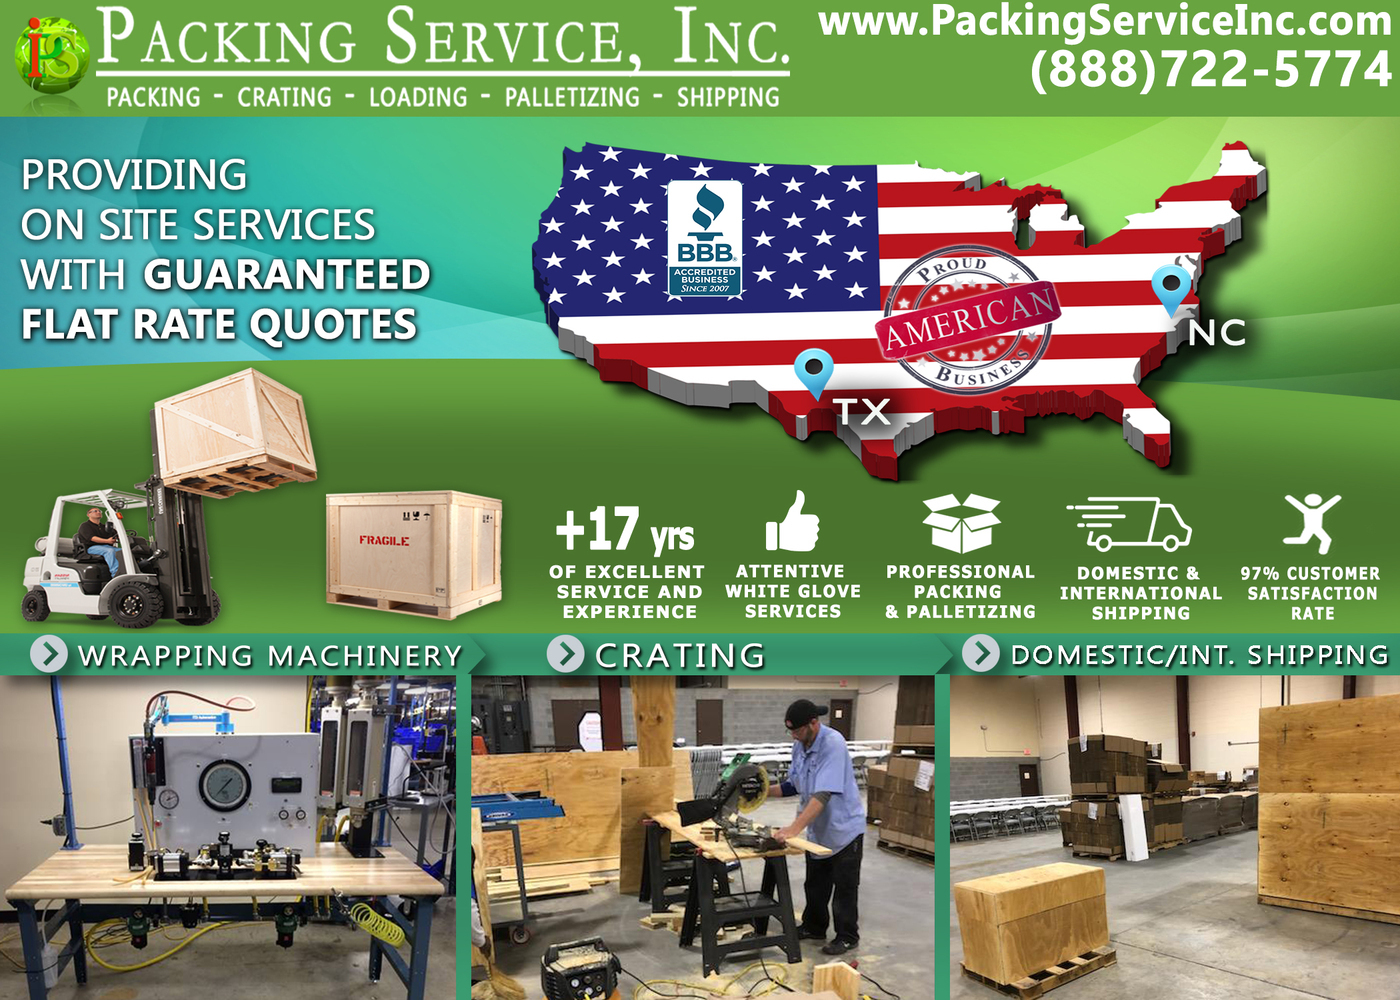 Packing Service, INC.